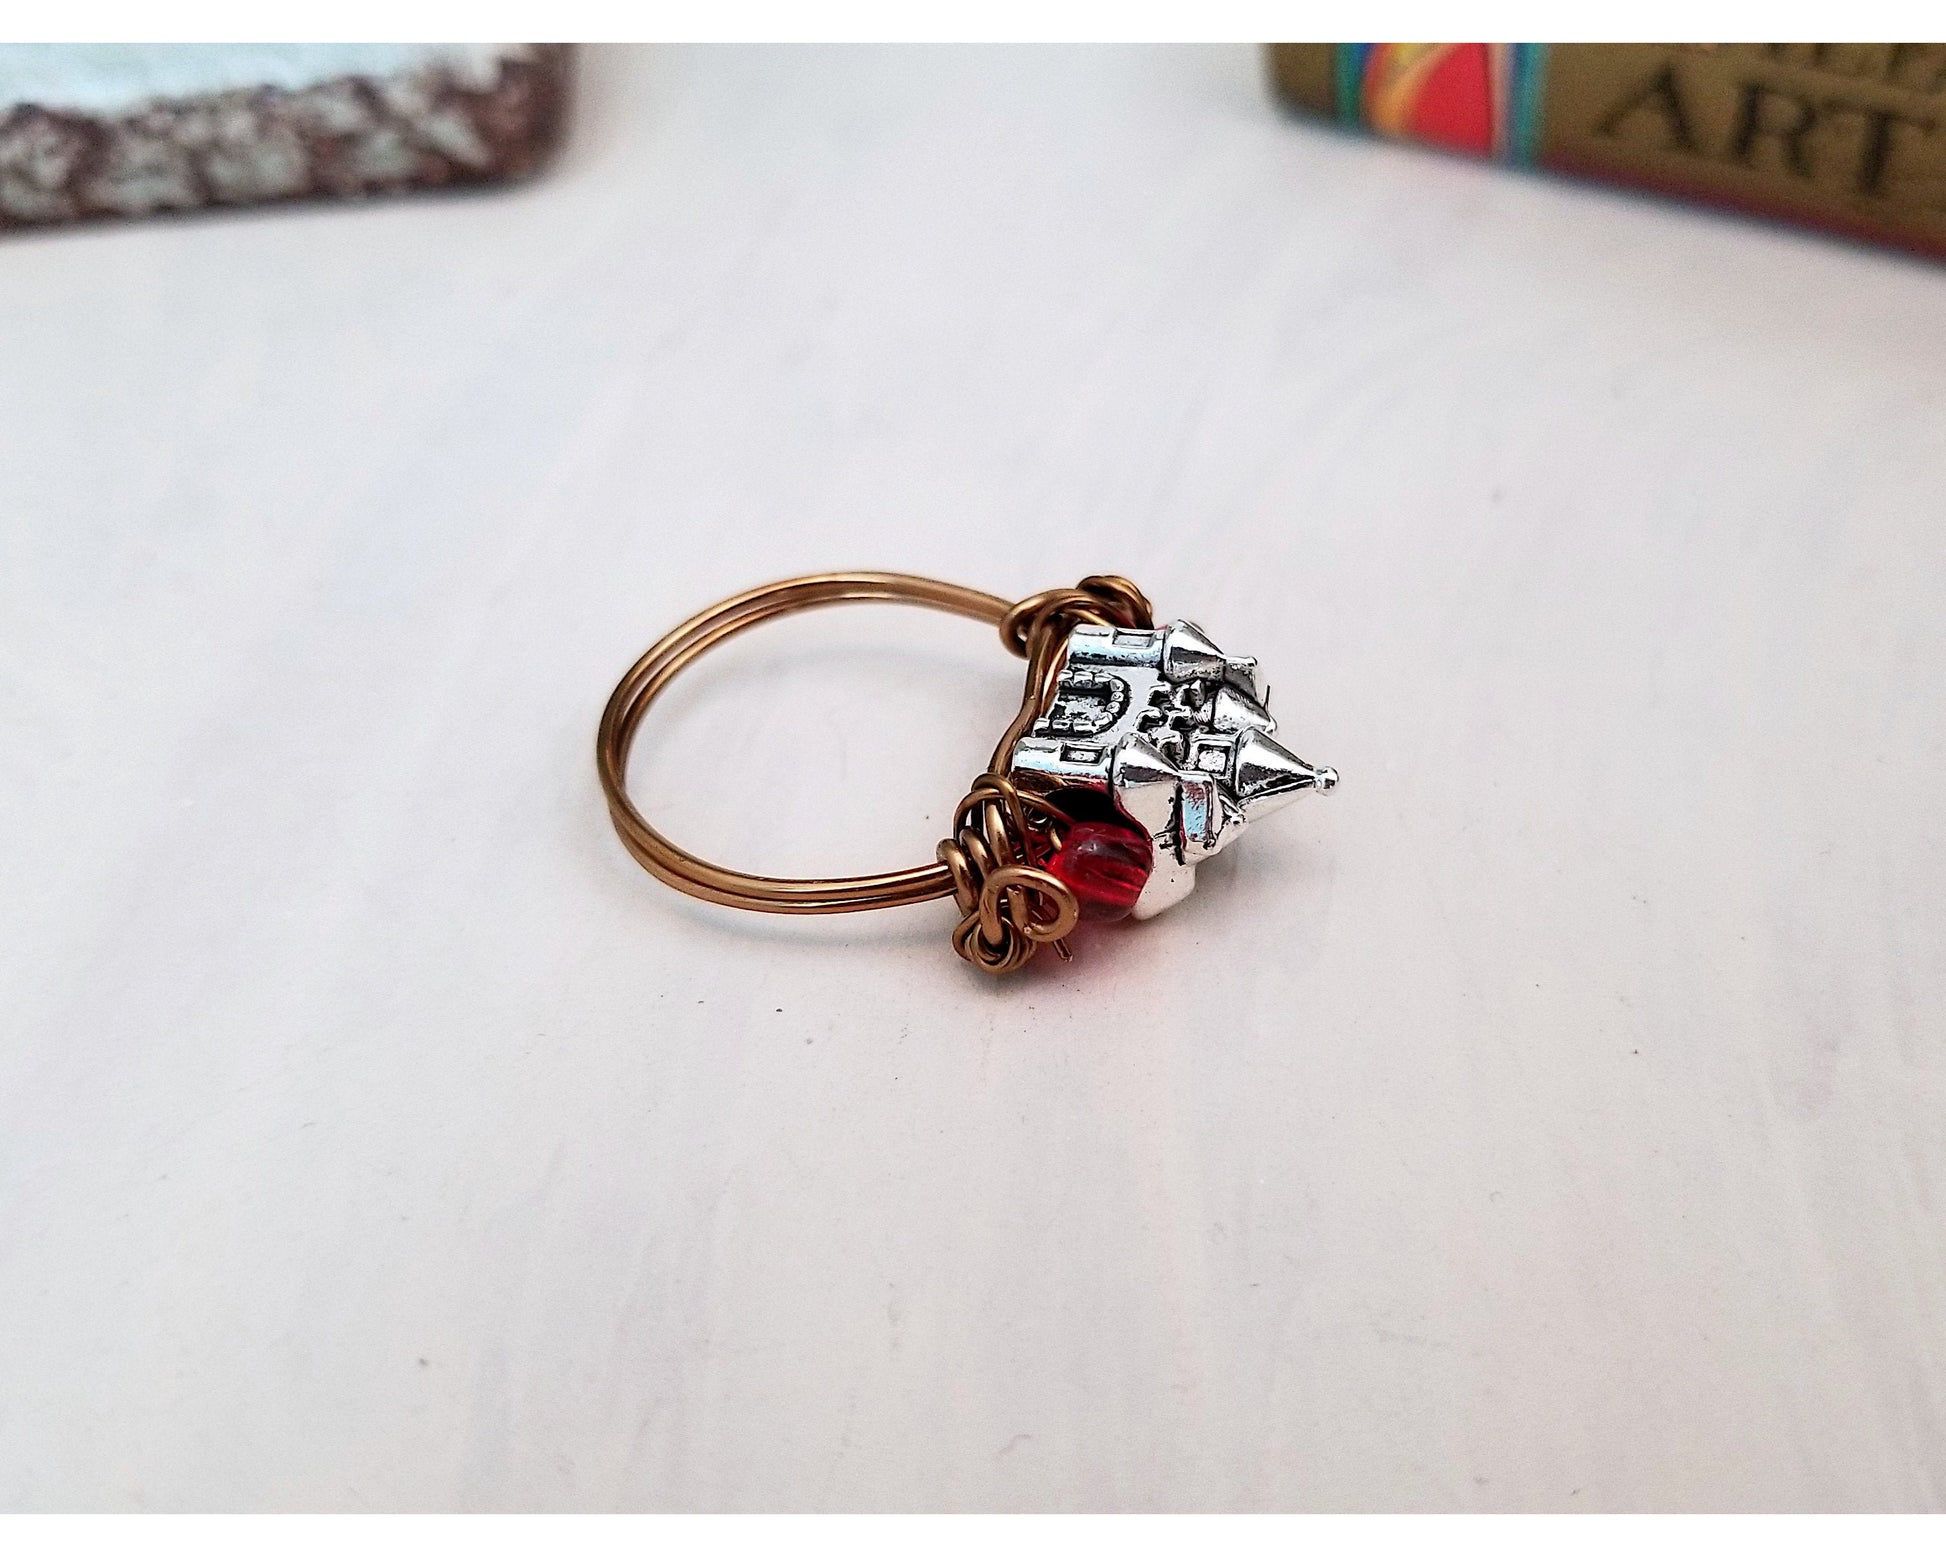 Castle Ring in Orange, Fairy Tale, Wedding, Bridesmaid, Gothic, Renaissance, Medieval, Choice of Colors and Metals